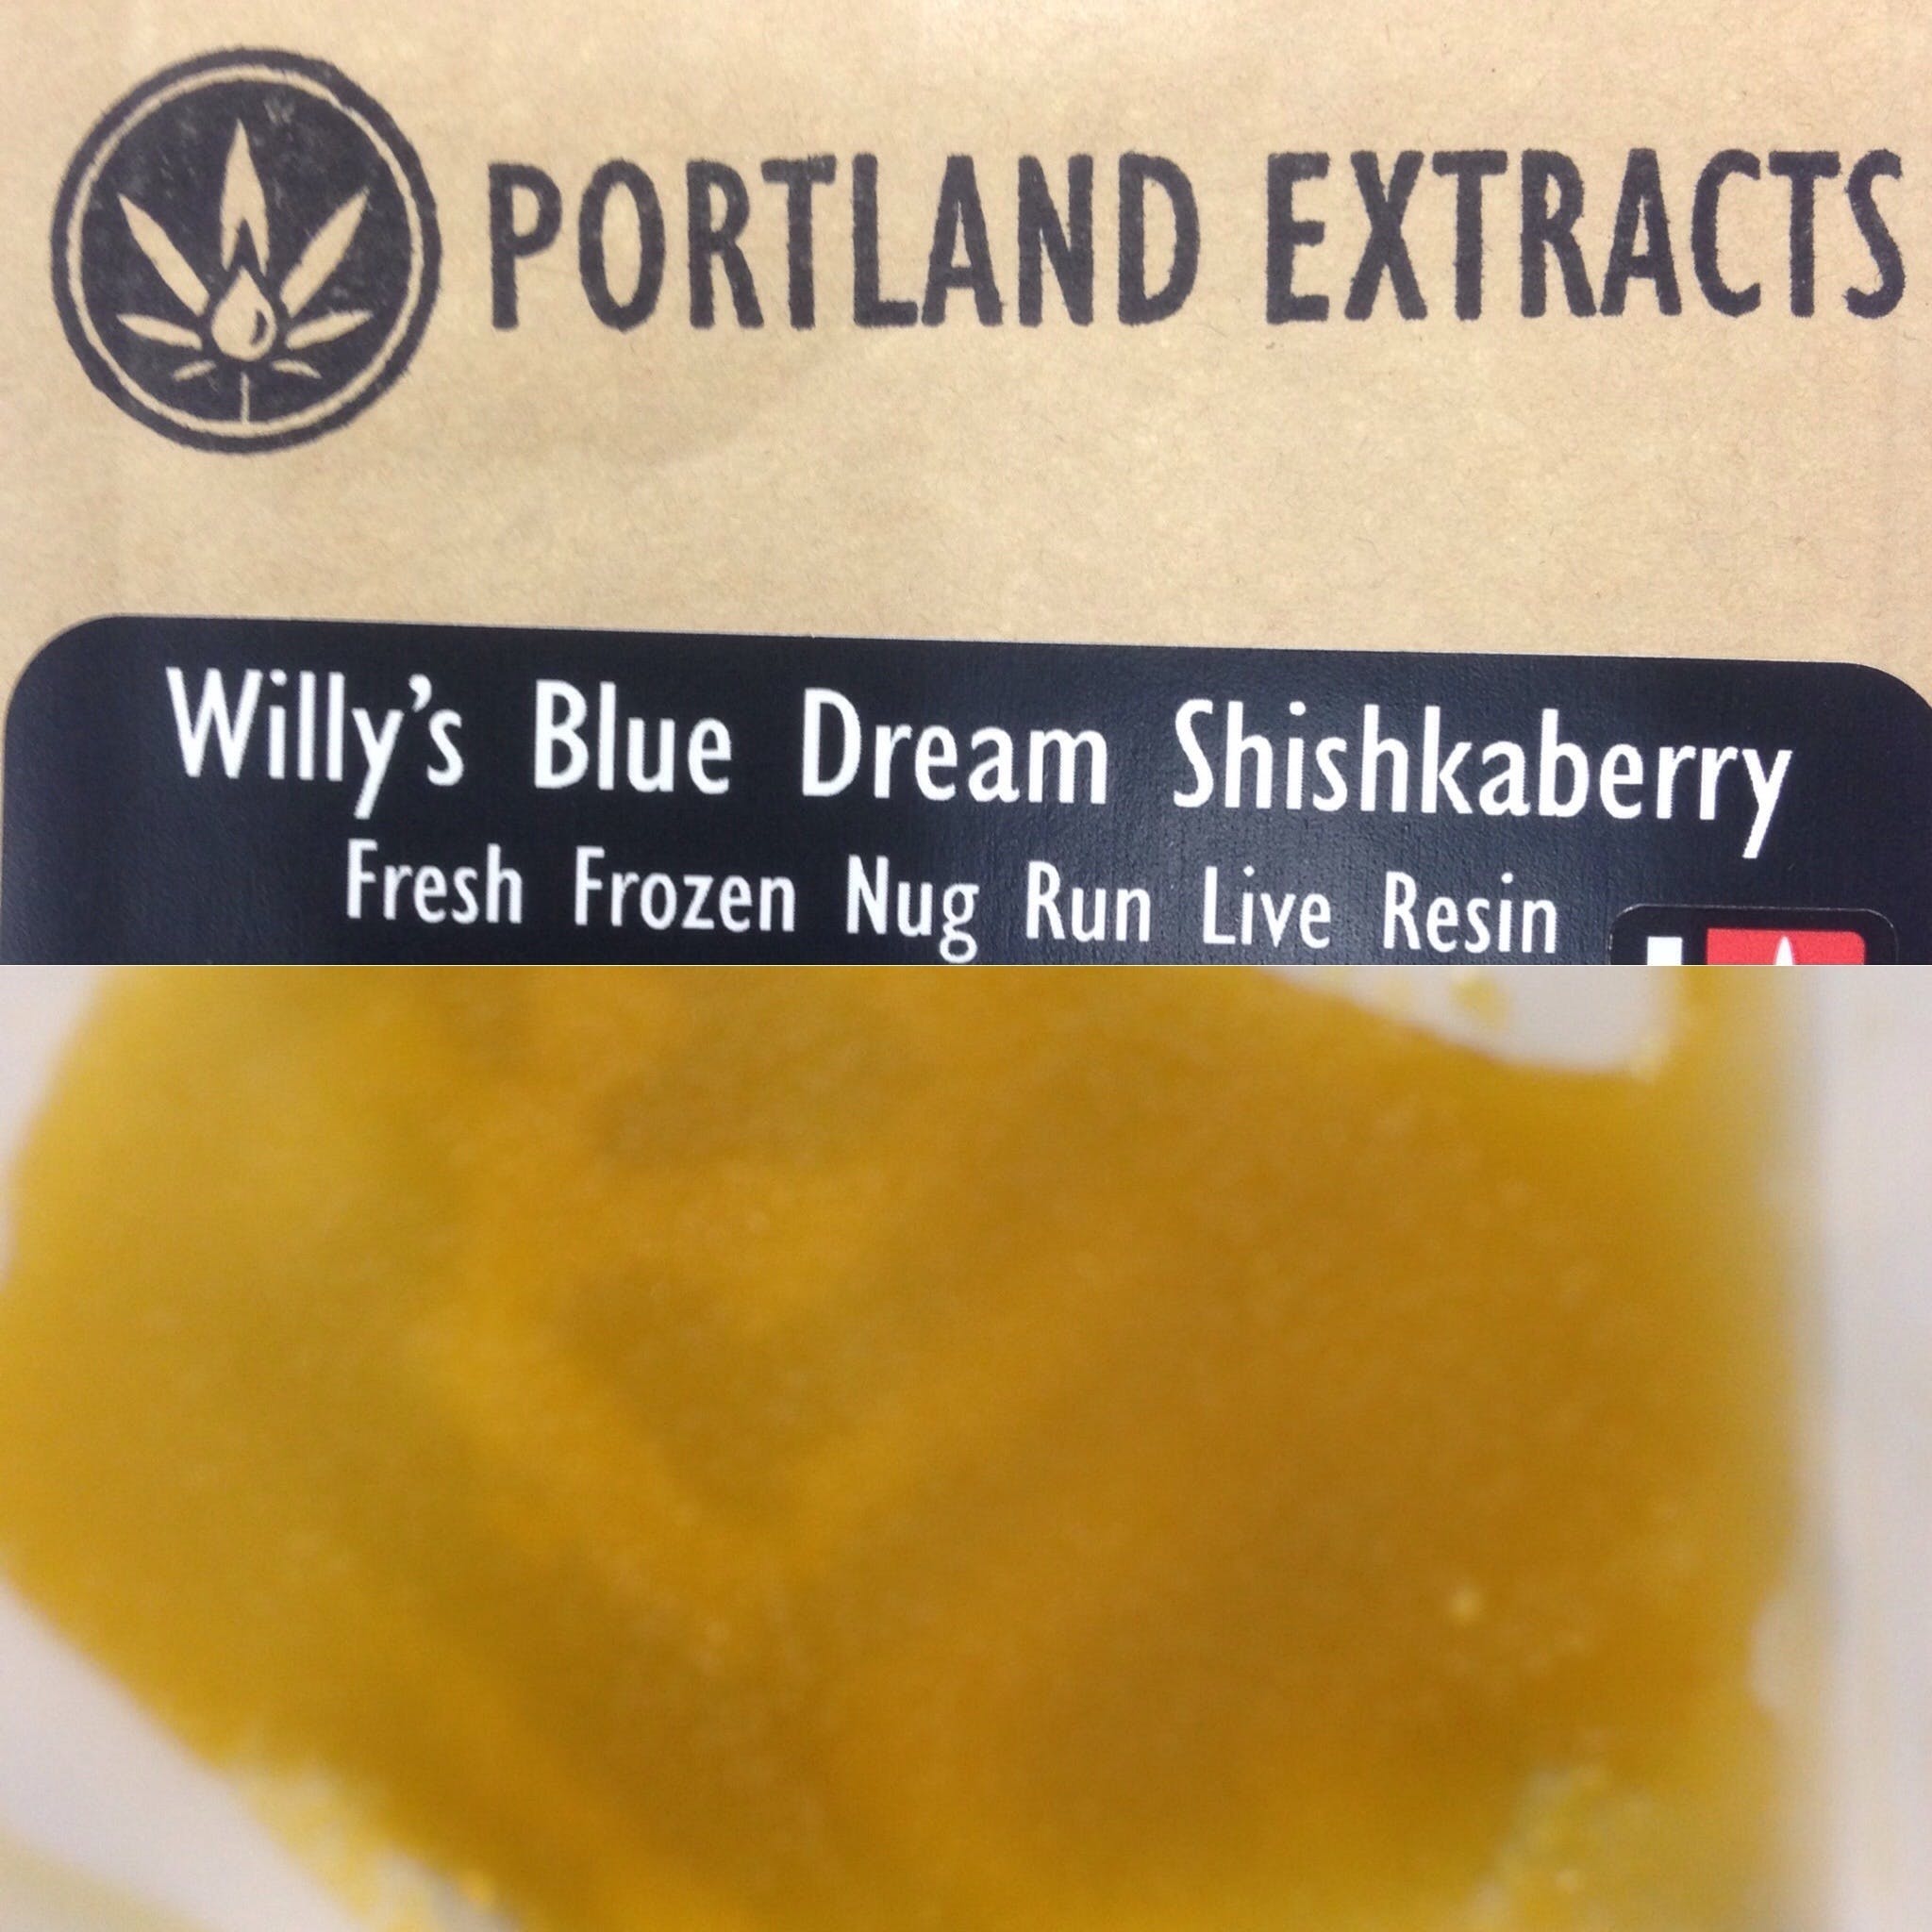 Willy's Blue Dream Shiskaberry Live Resin